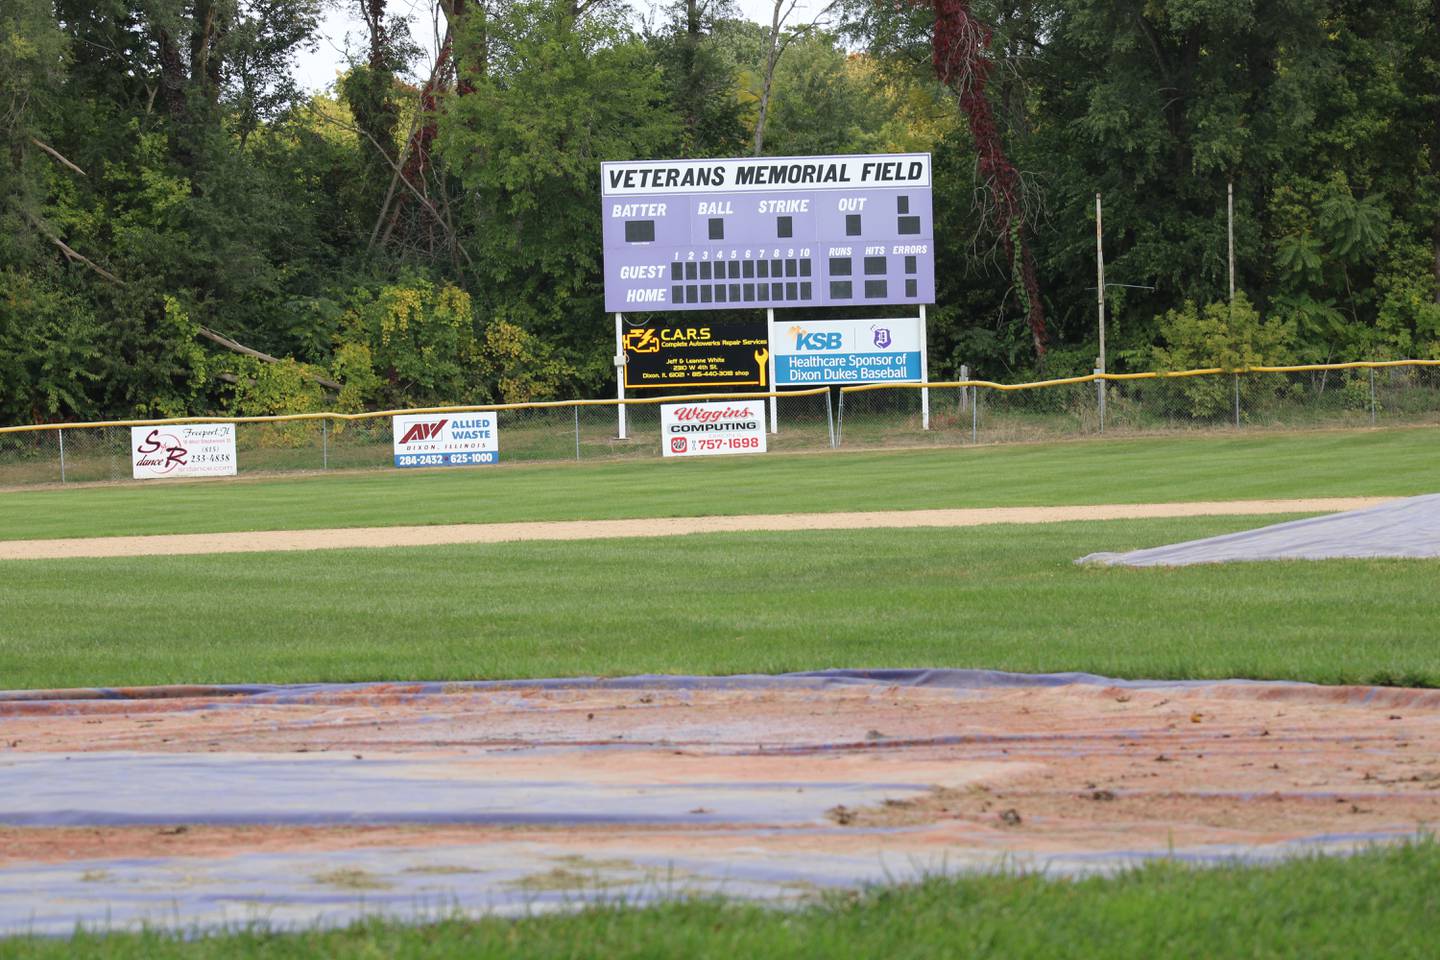 Dixon High School plays baseball at Veterans Memorial Field, one of the venues operated by the Dixon Park District.